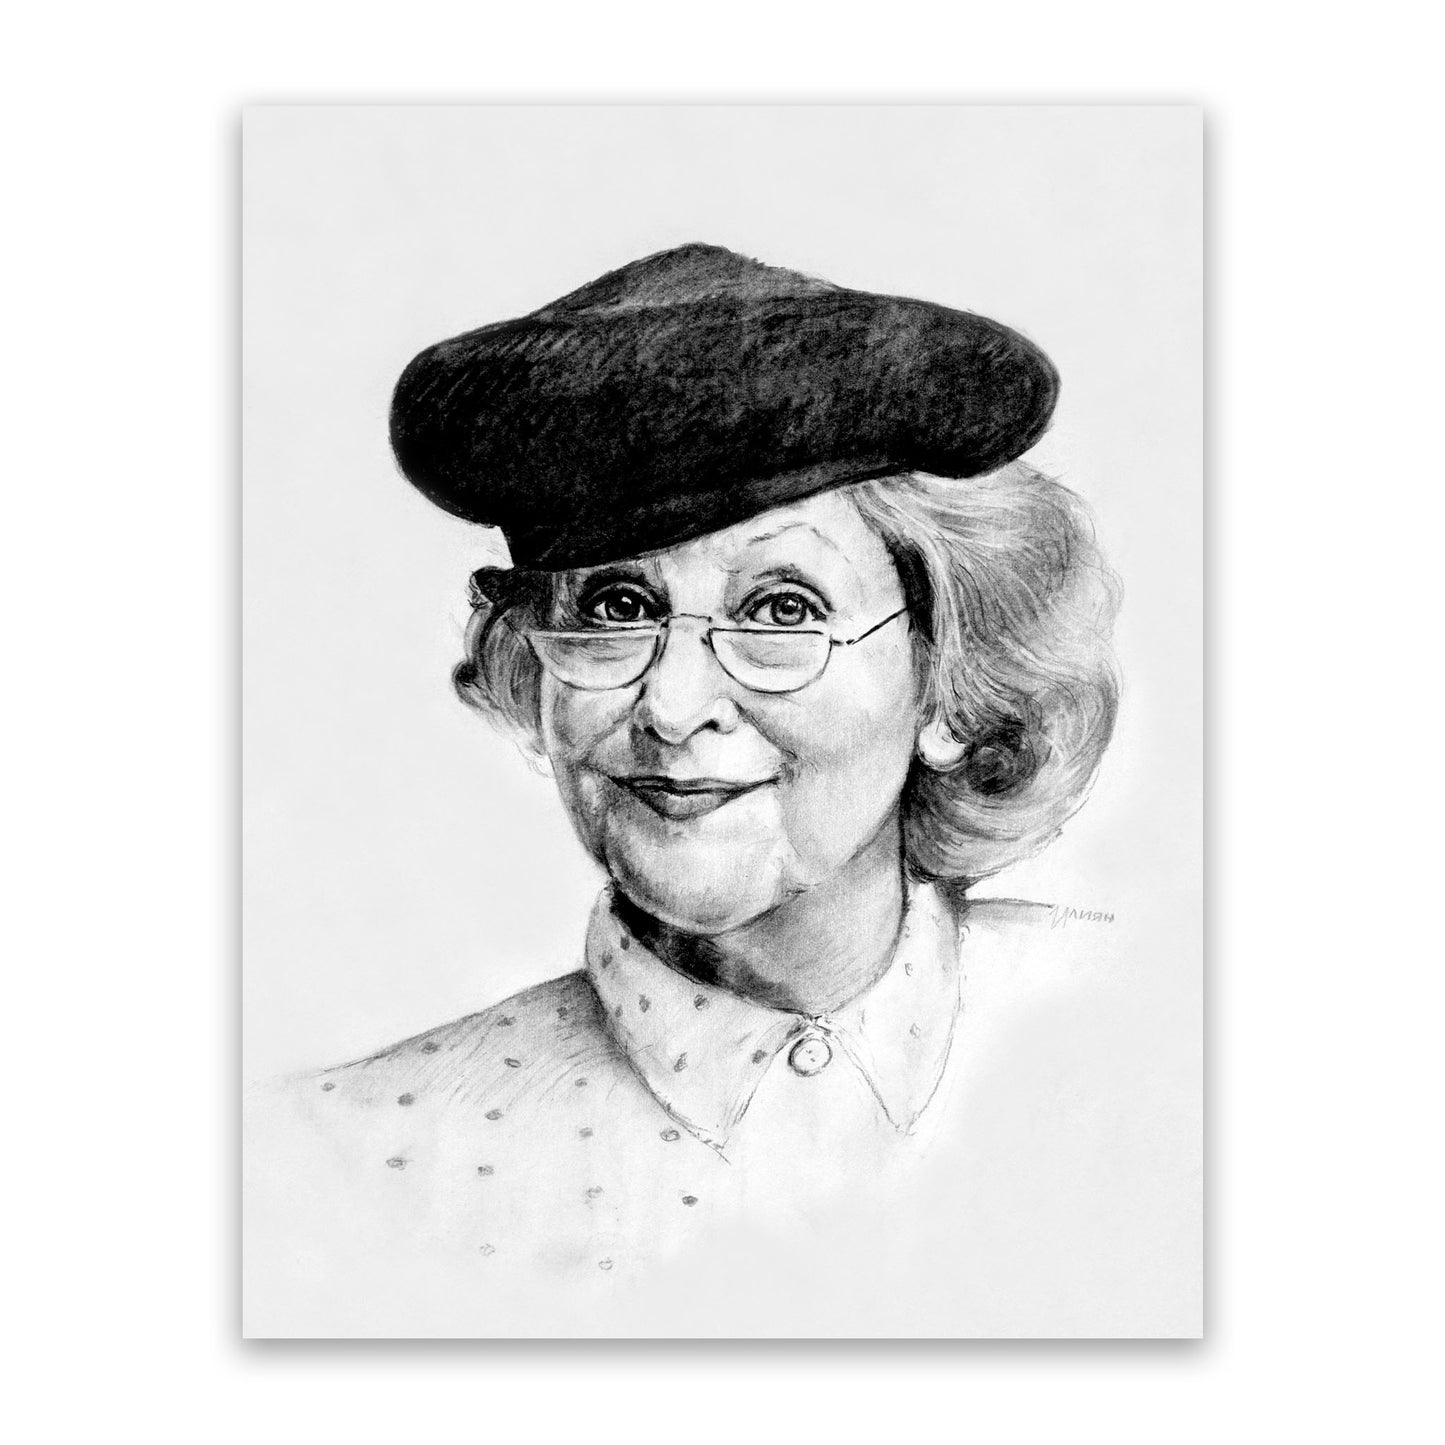 Black and white charcoal portrait of an elegant older woman with short, wavy silver hair, half-moon glasses, wearing a white shirt with polka dots and a black beret.